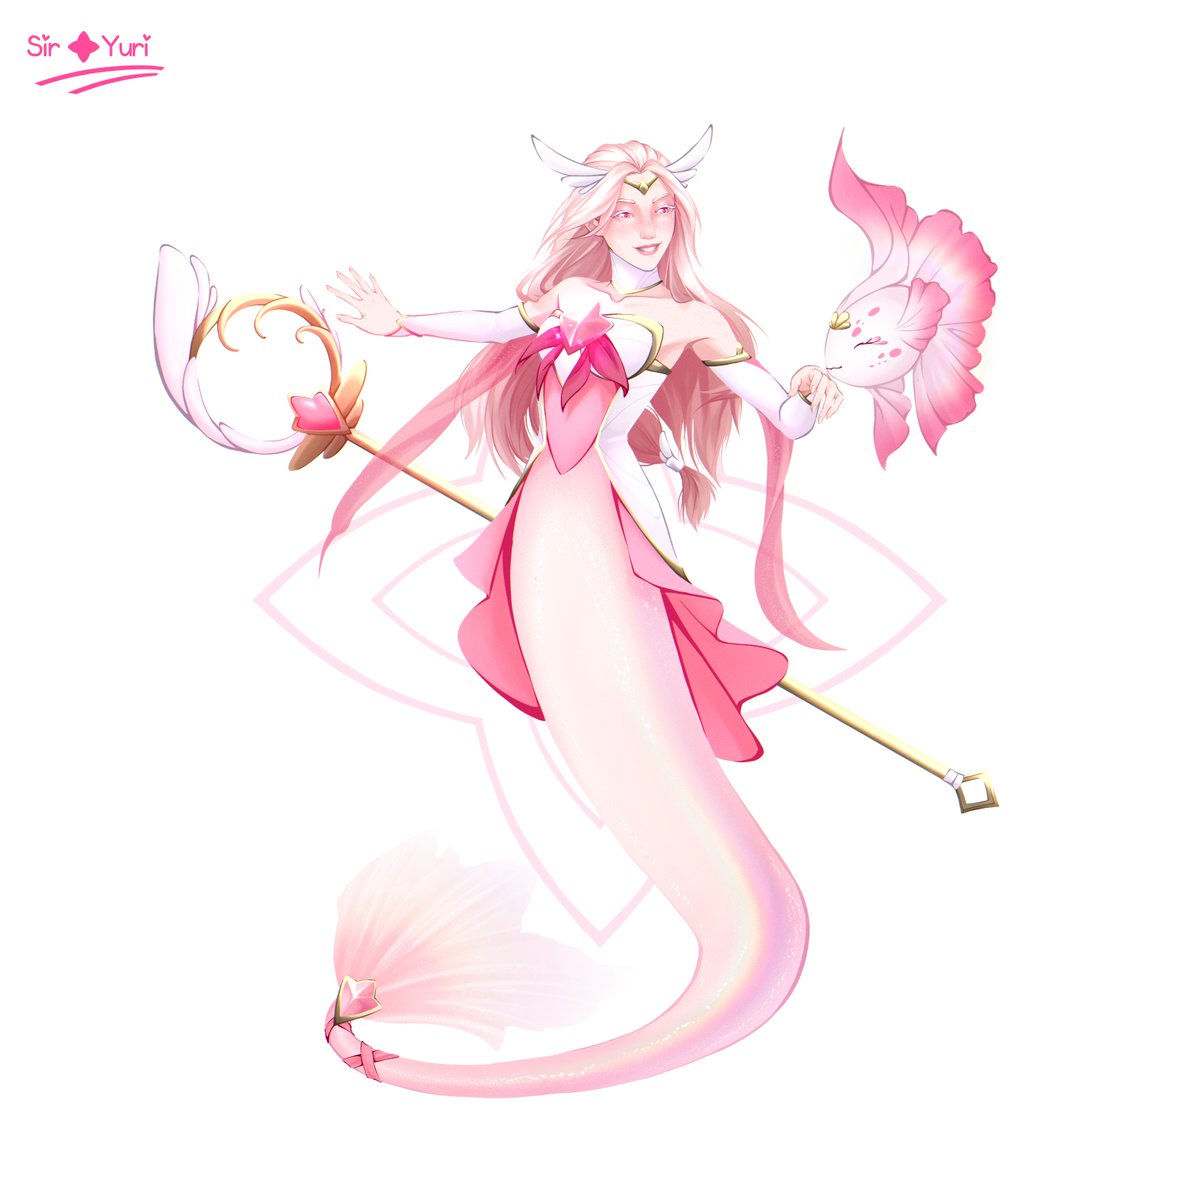 ✨ STAR GUARDIAN NAMI  ✨ 

Despite having little experience, Nami guarantees the safety of the Sea of Stars beyond the nebulae as the captain of her team. Confident in her own words, she and the cute Mayin, swear to keep the skies always lit.

#StarGuardian #LeagueofLegends